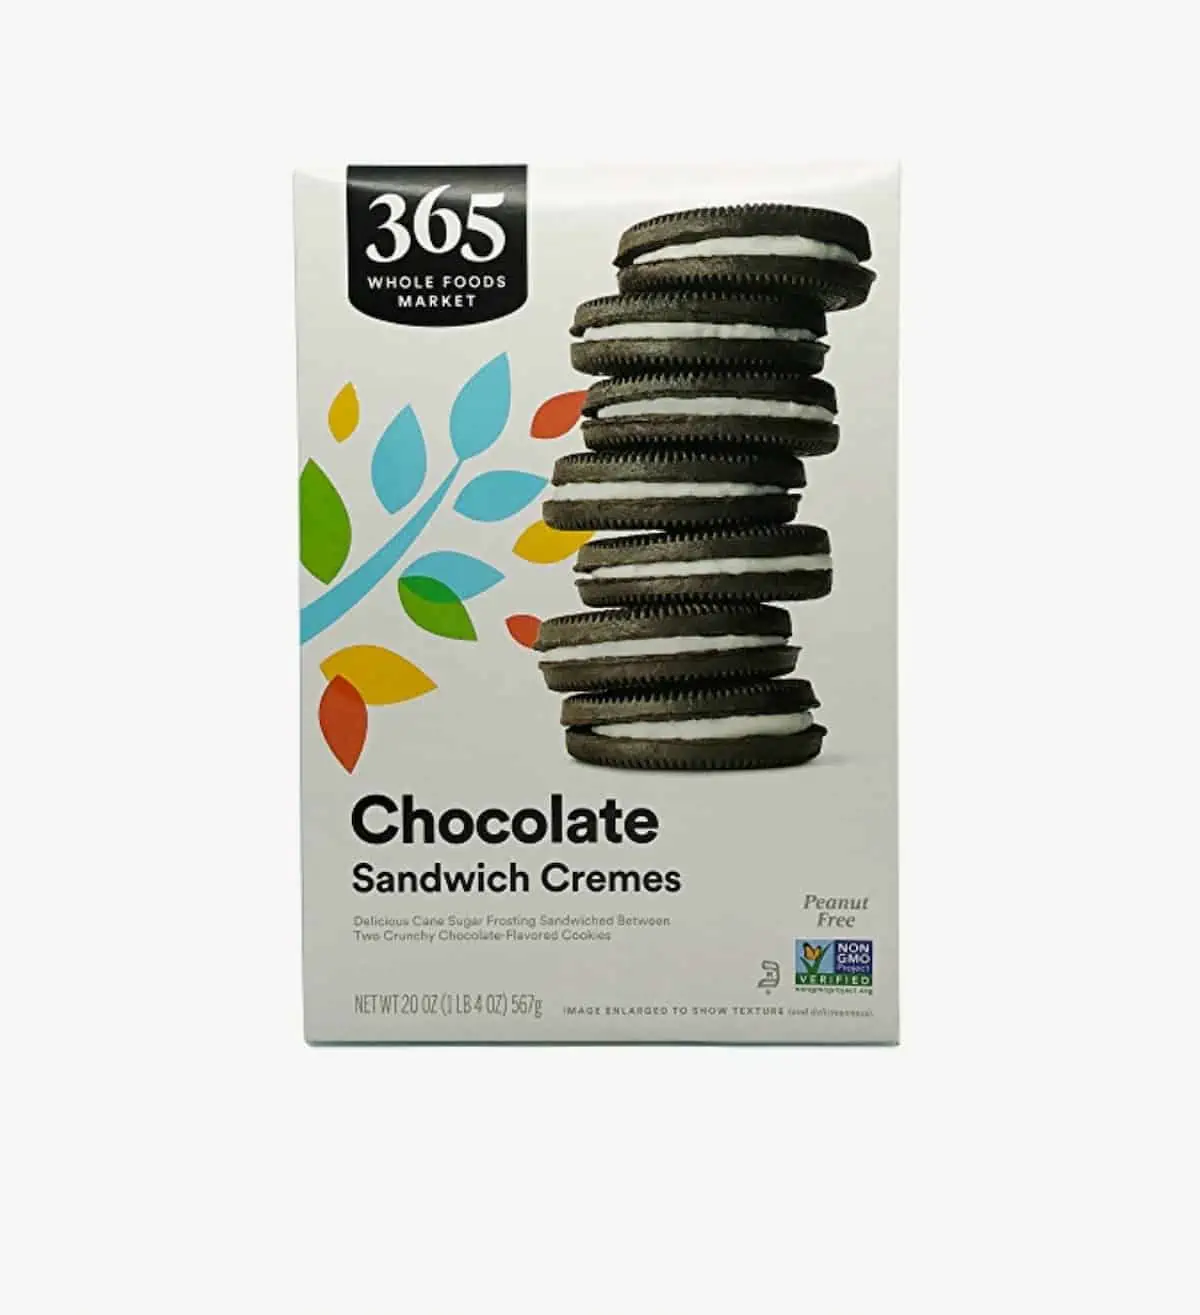 A box of 365 Whole Foods Market Chocolate Sandwich Cremes.